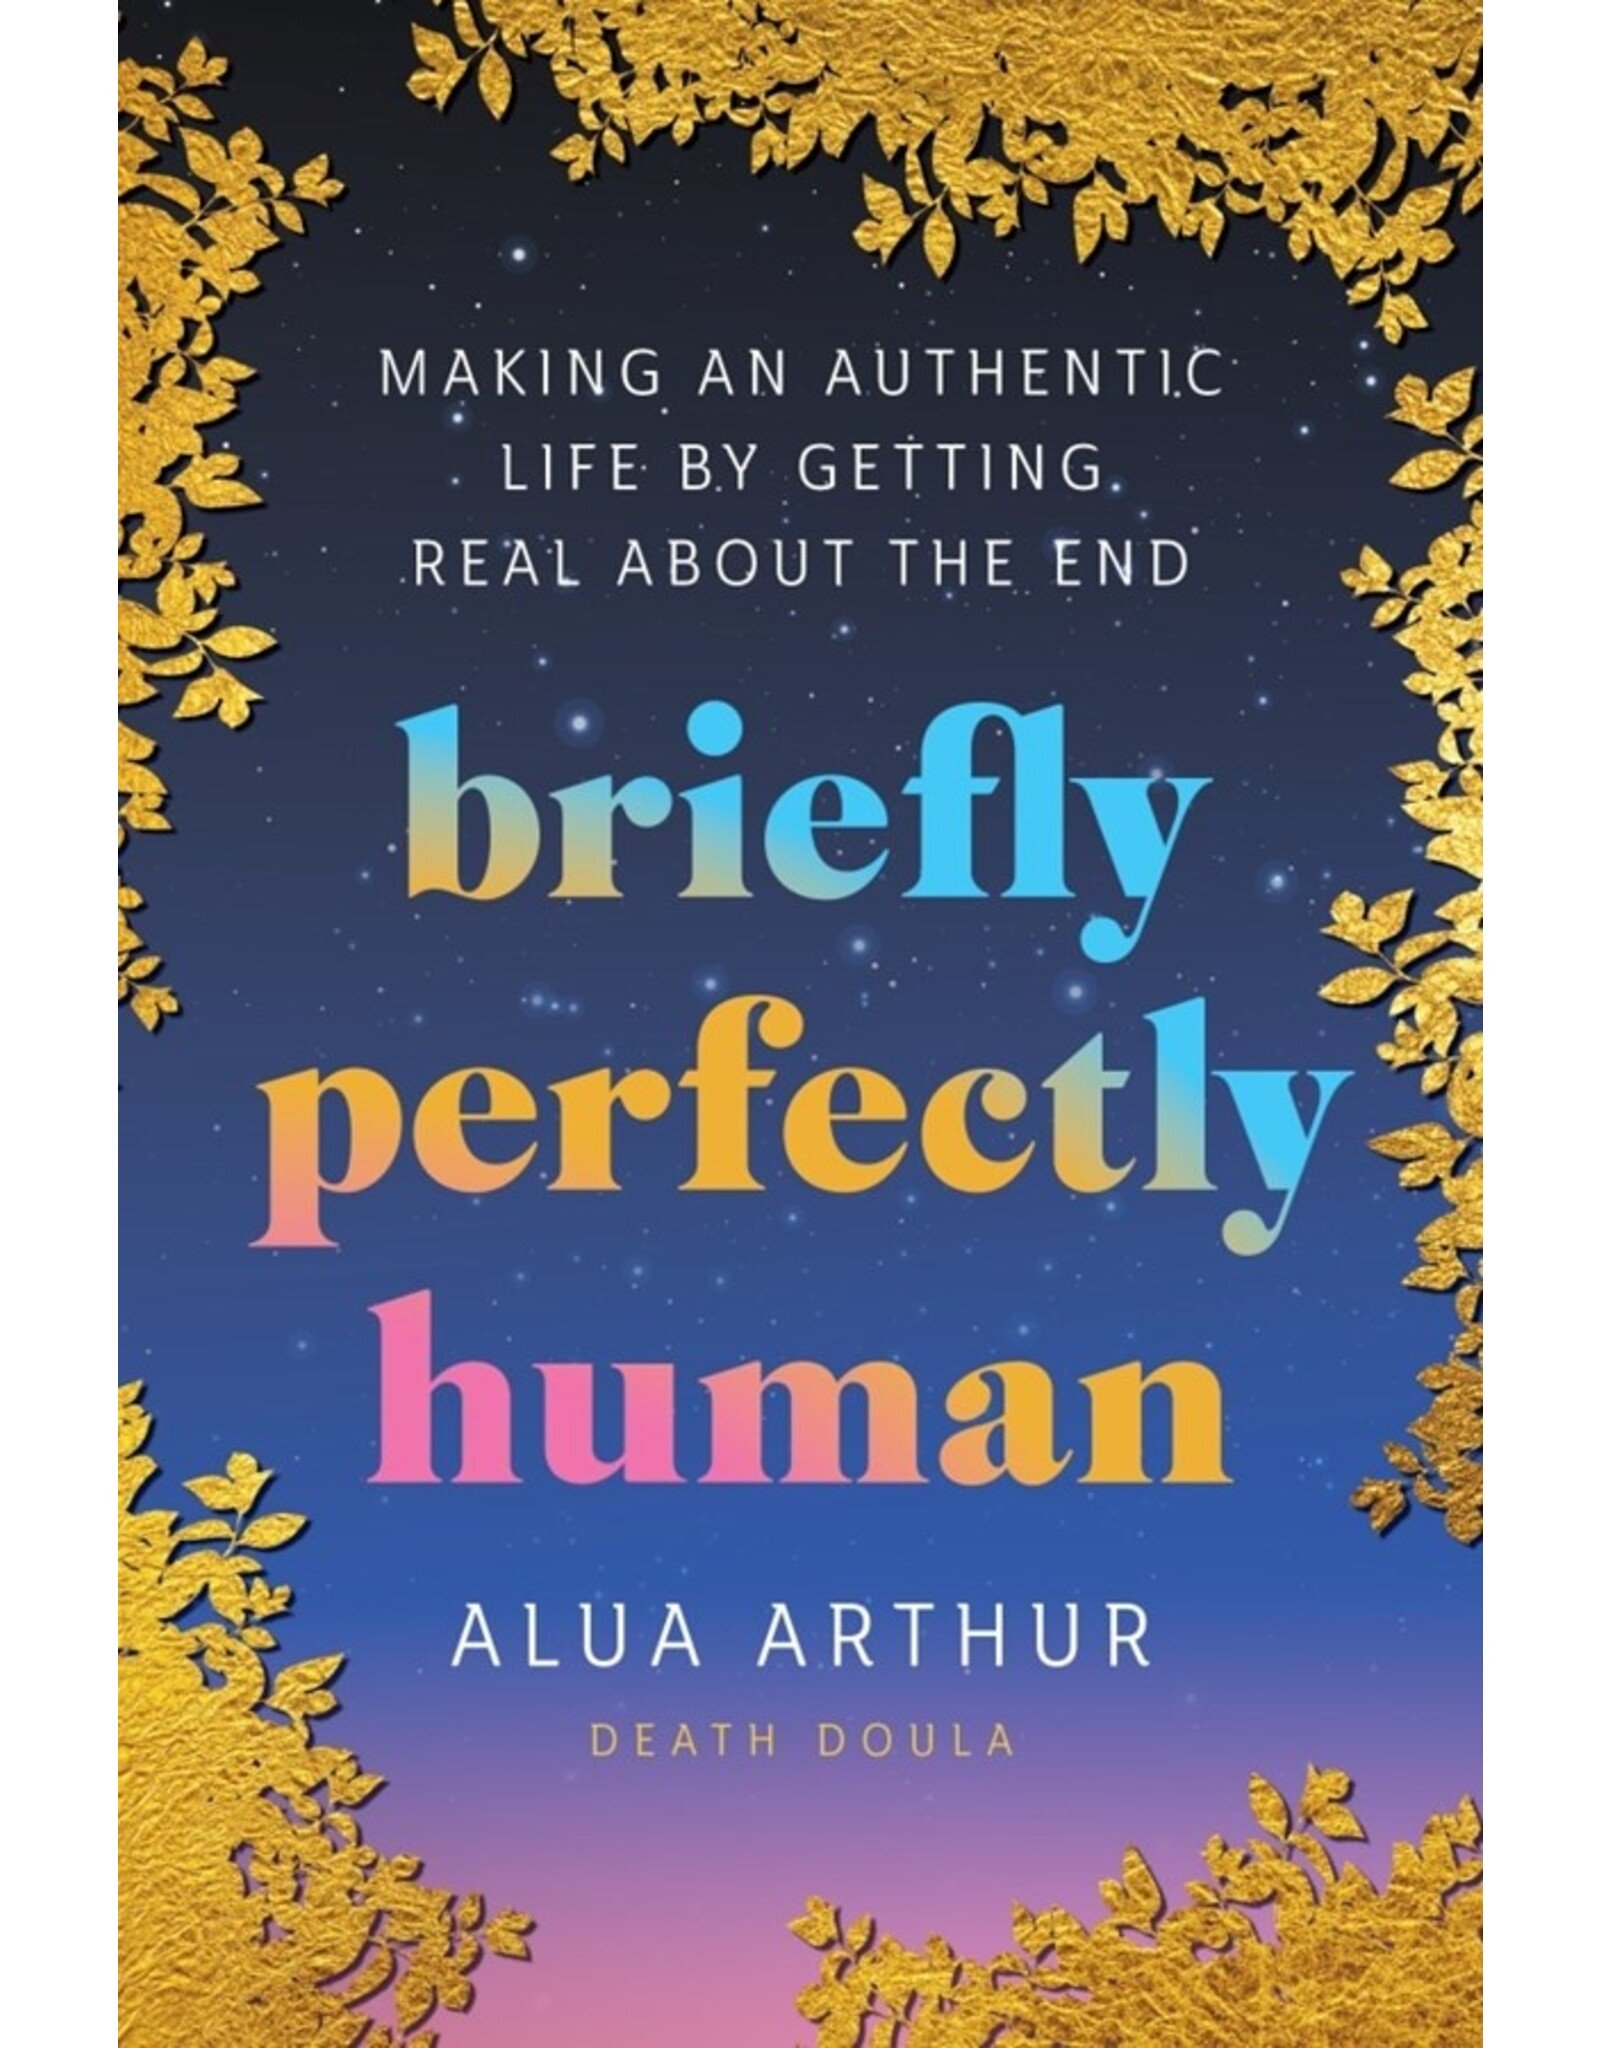 Books briefly perfectly human : Making An Authentic Life by Getting Read About the End by Alua Arthur ( Death Doula)